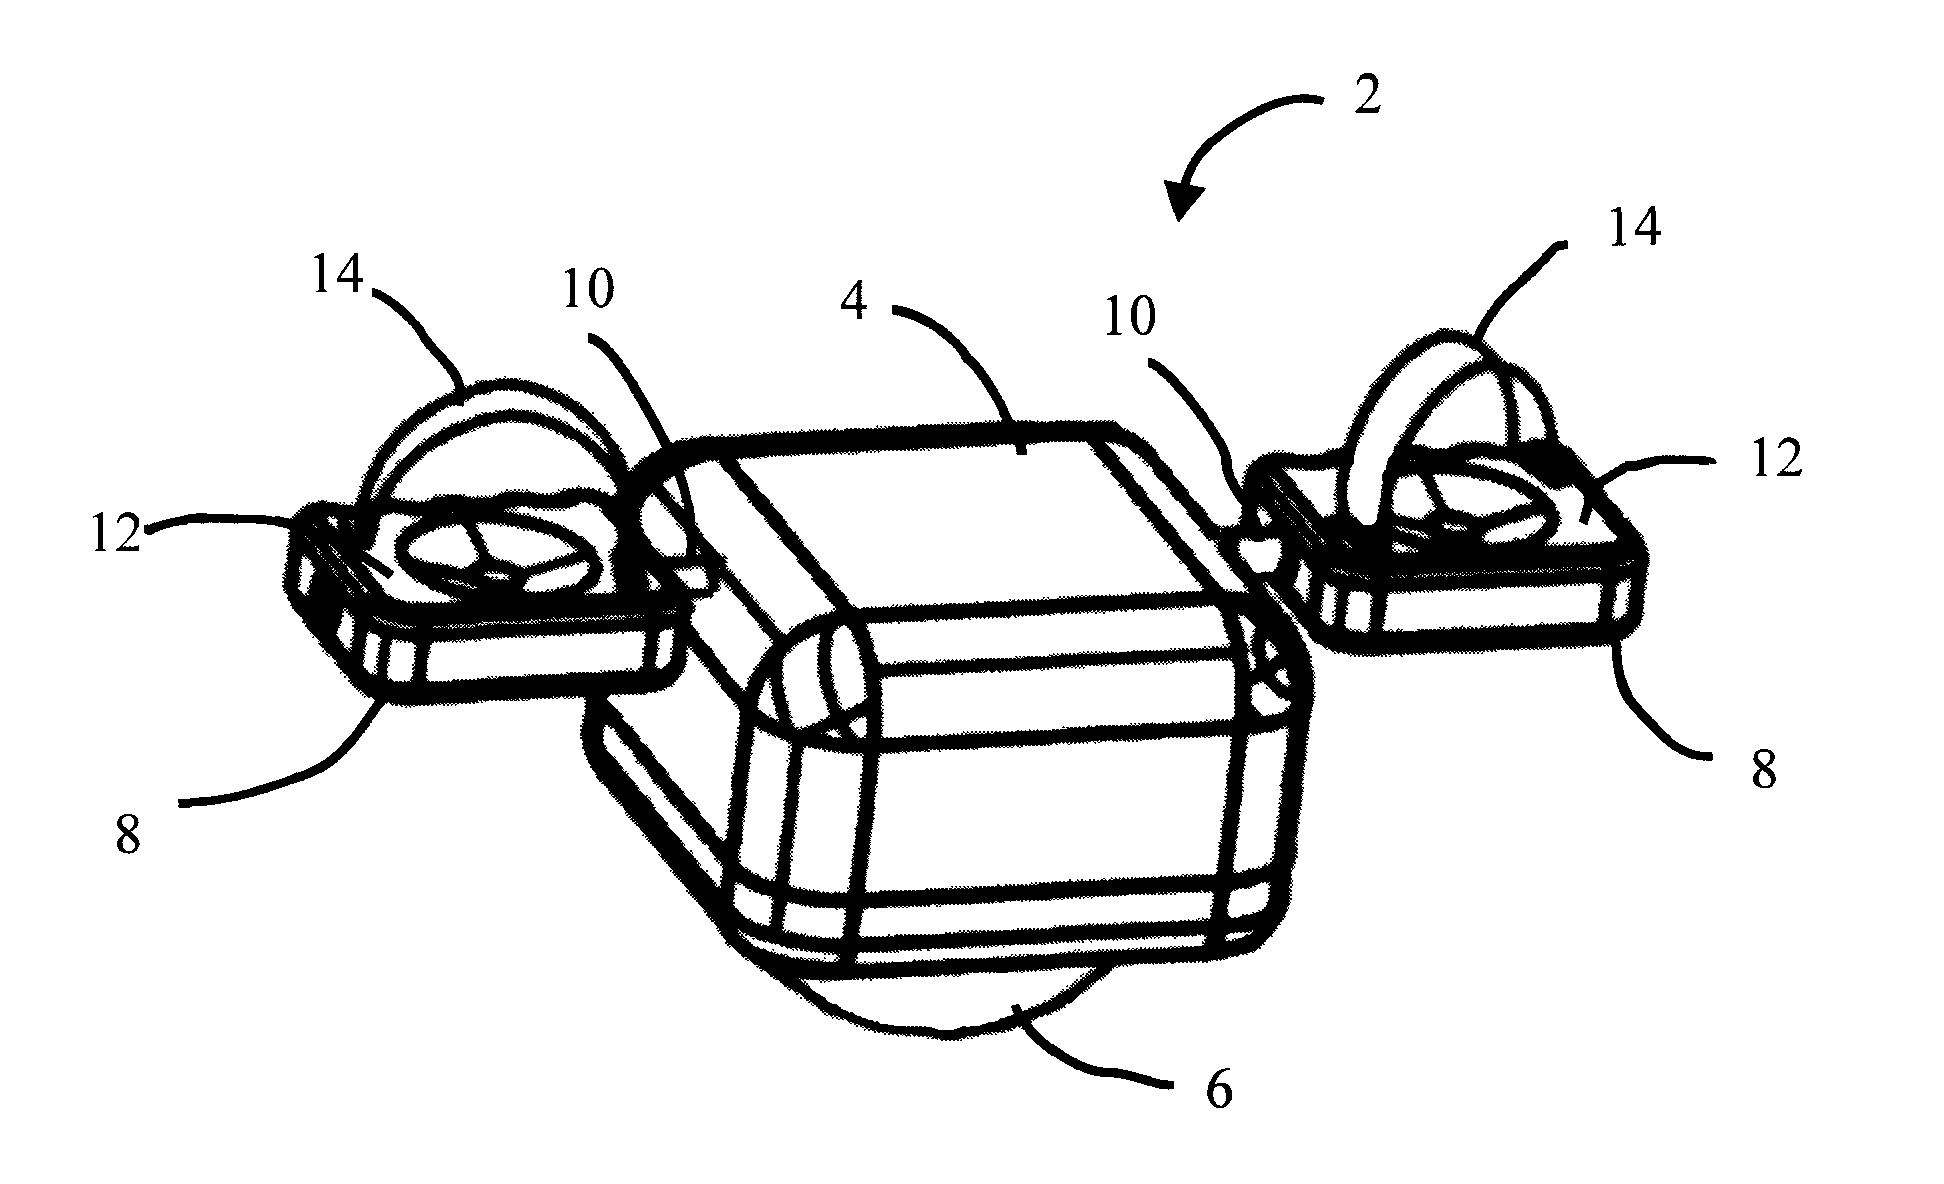 Multi-directional rolling abdominal exercise device